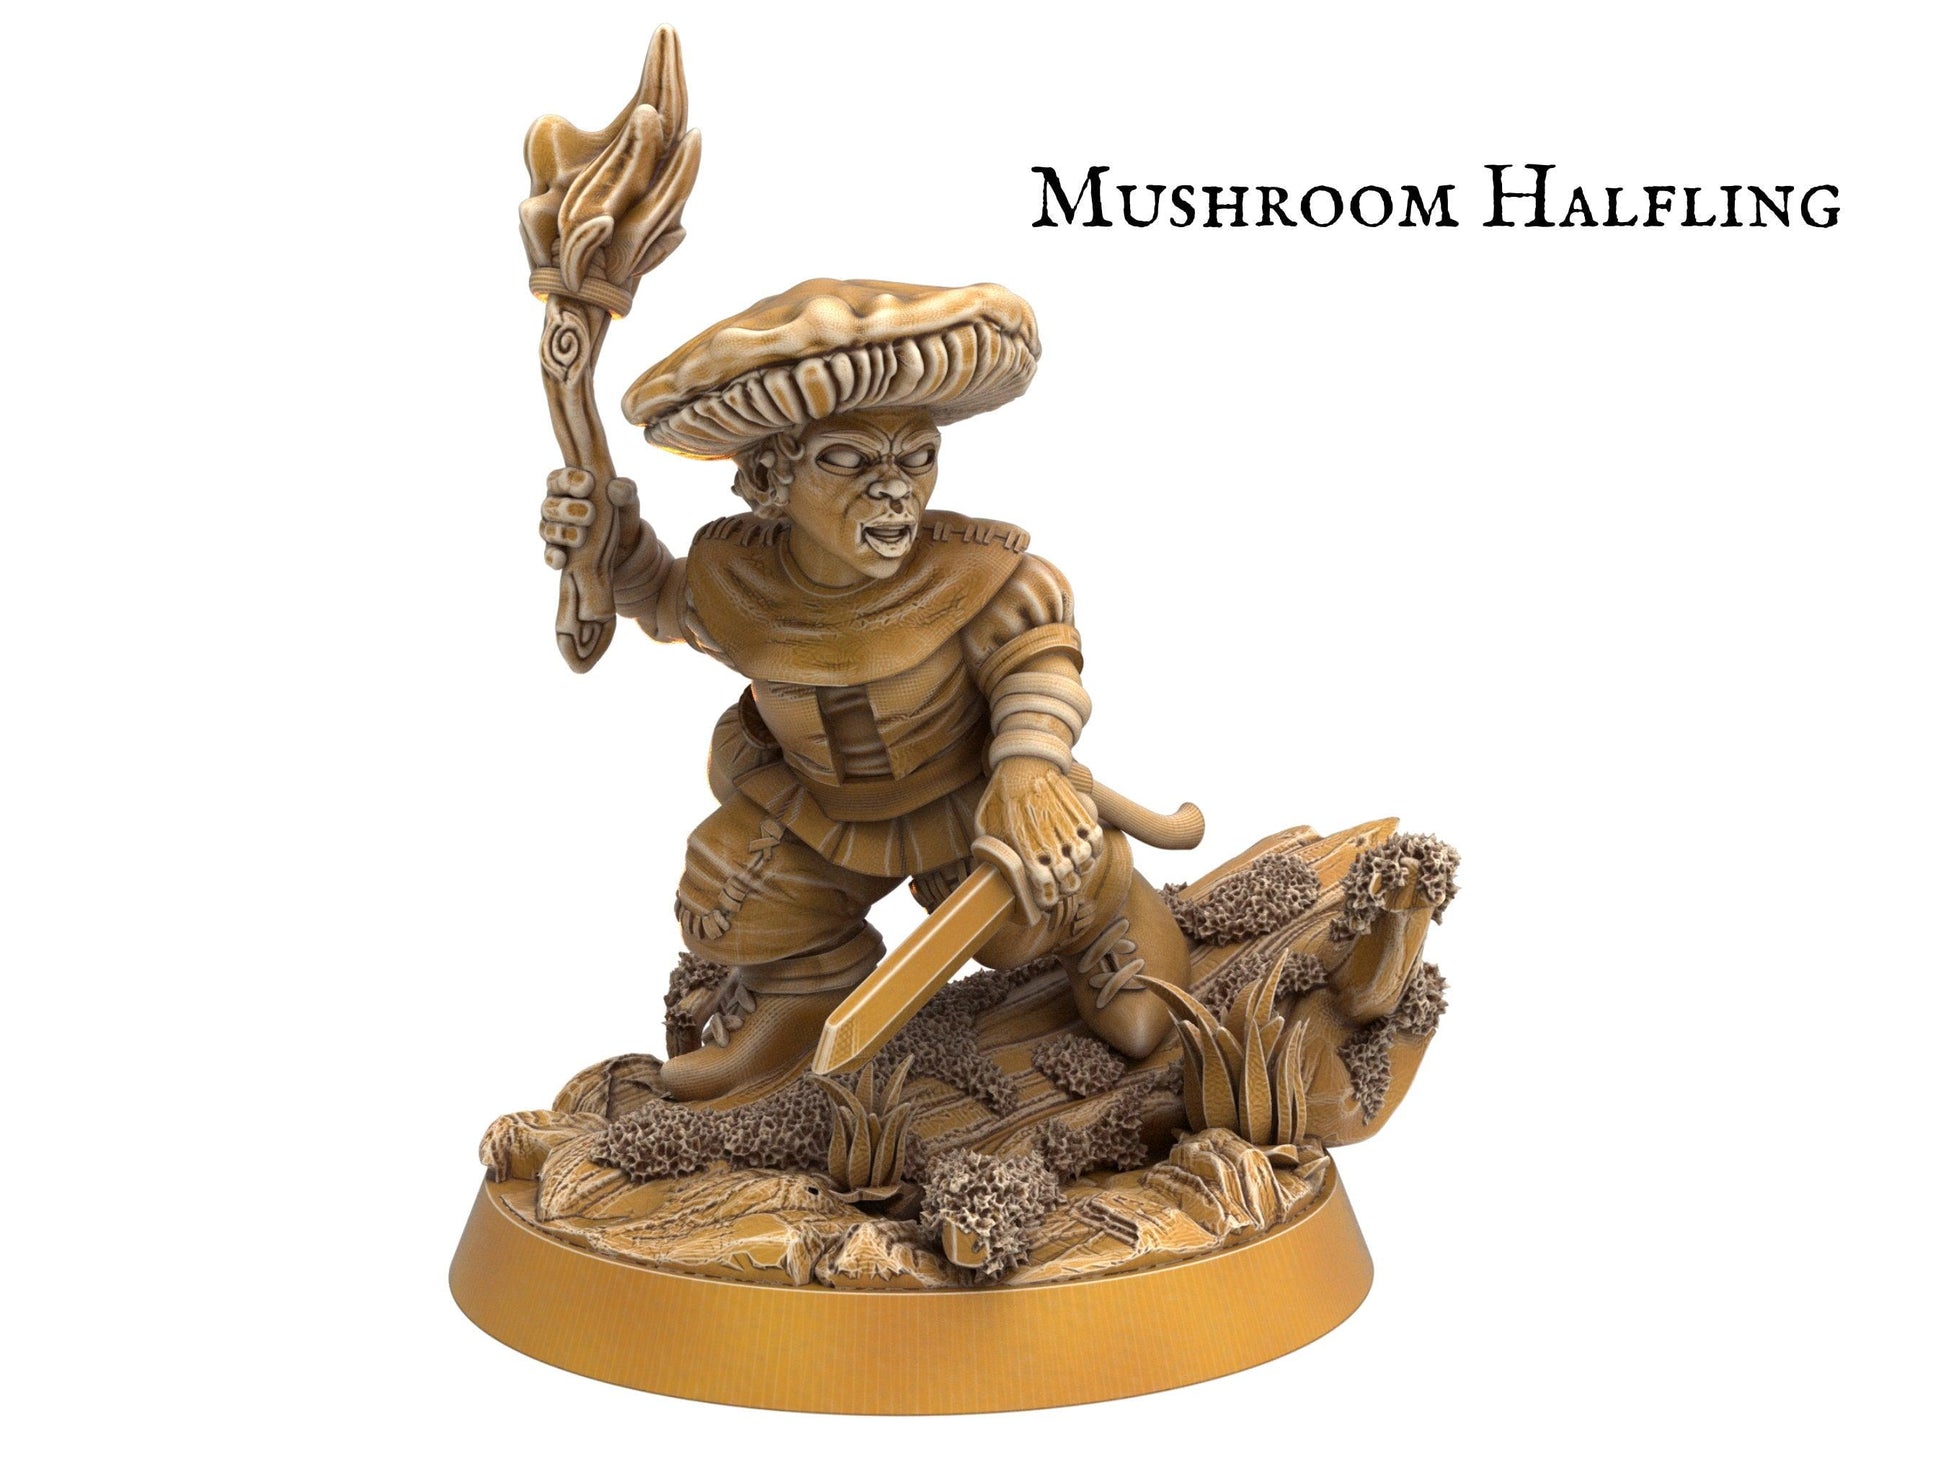 Female Halfling Miniature with mushroom hat - 9 Poses - 32mm scale Tabletop gaming DnD Miniature Dungeons and Dragons, wargaming dnd 5e - Plague Miniatures shop for DnD Miniatures